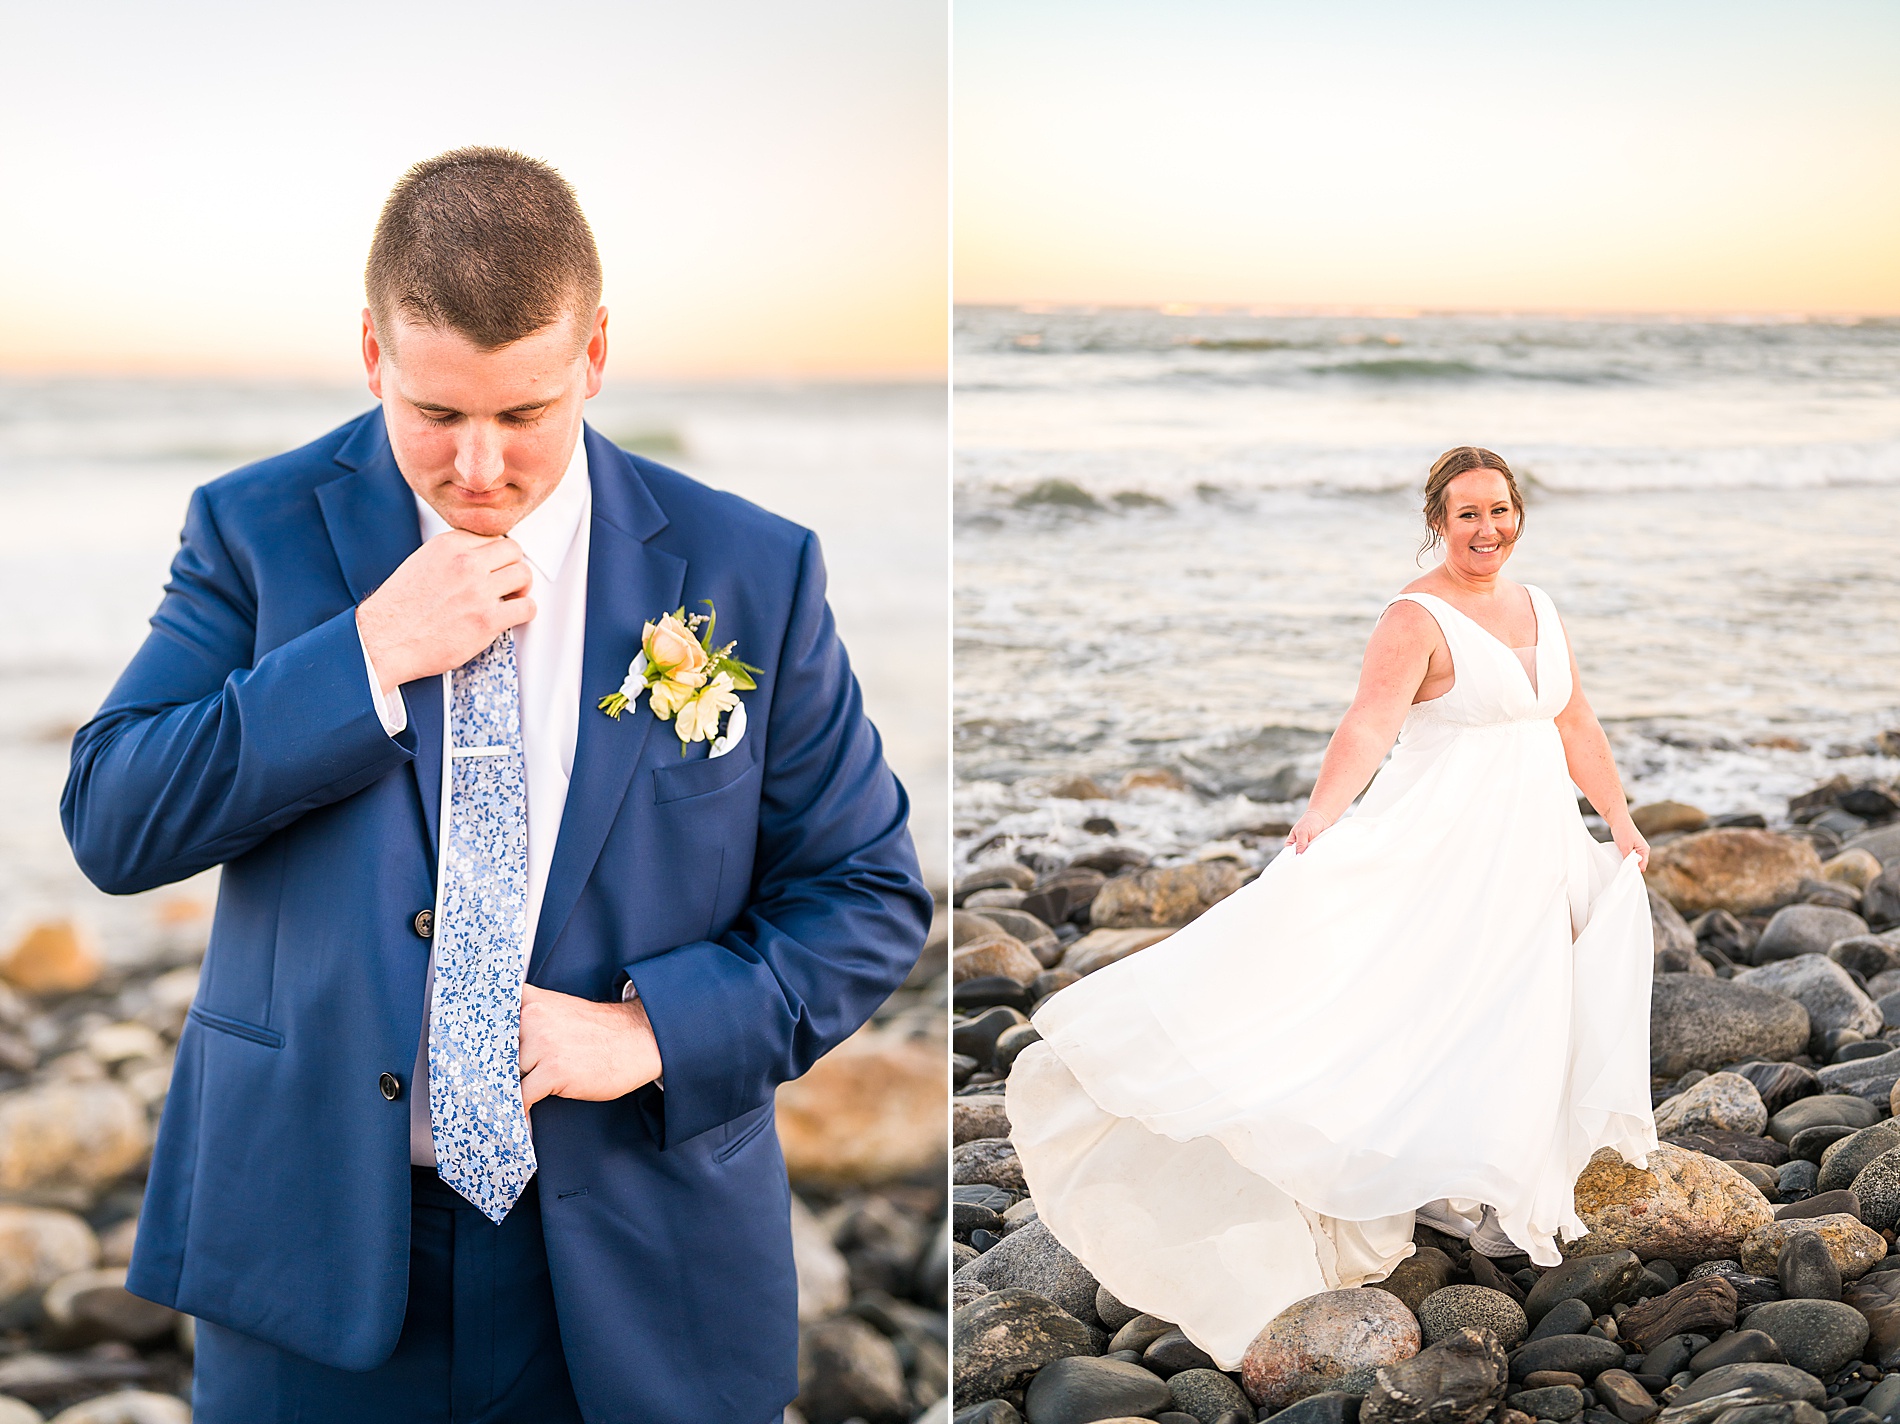 Bride and groom stand on rocky oceanfront